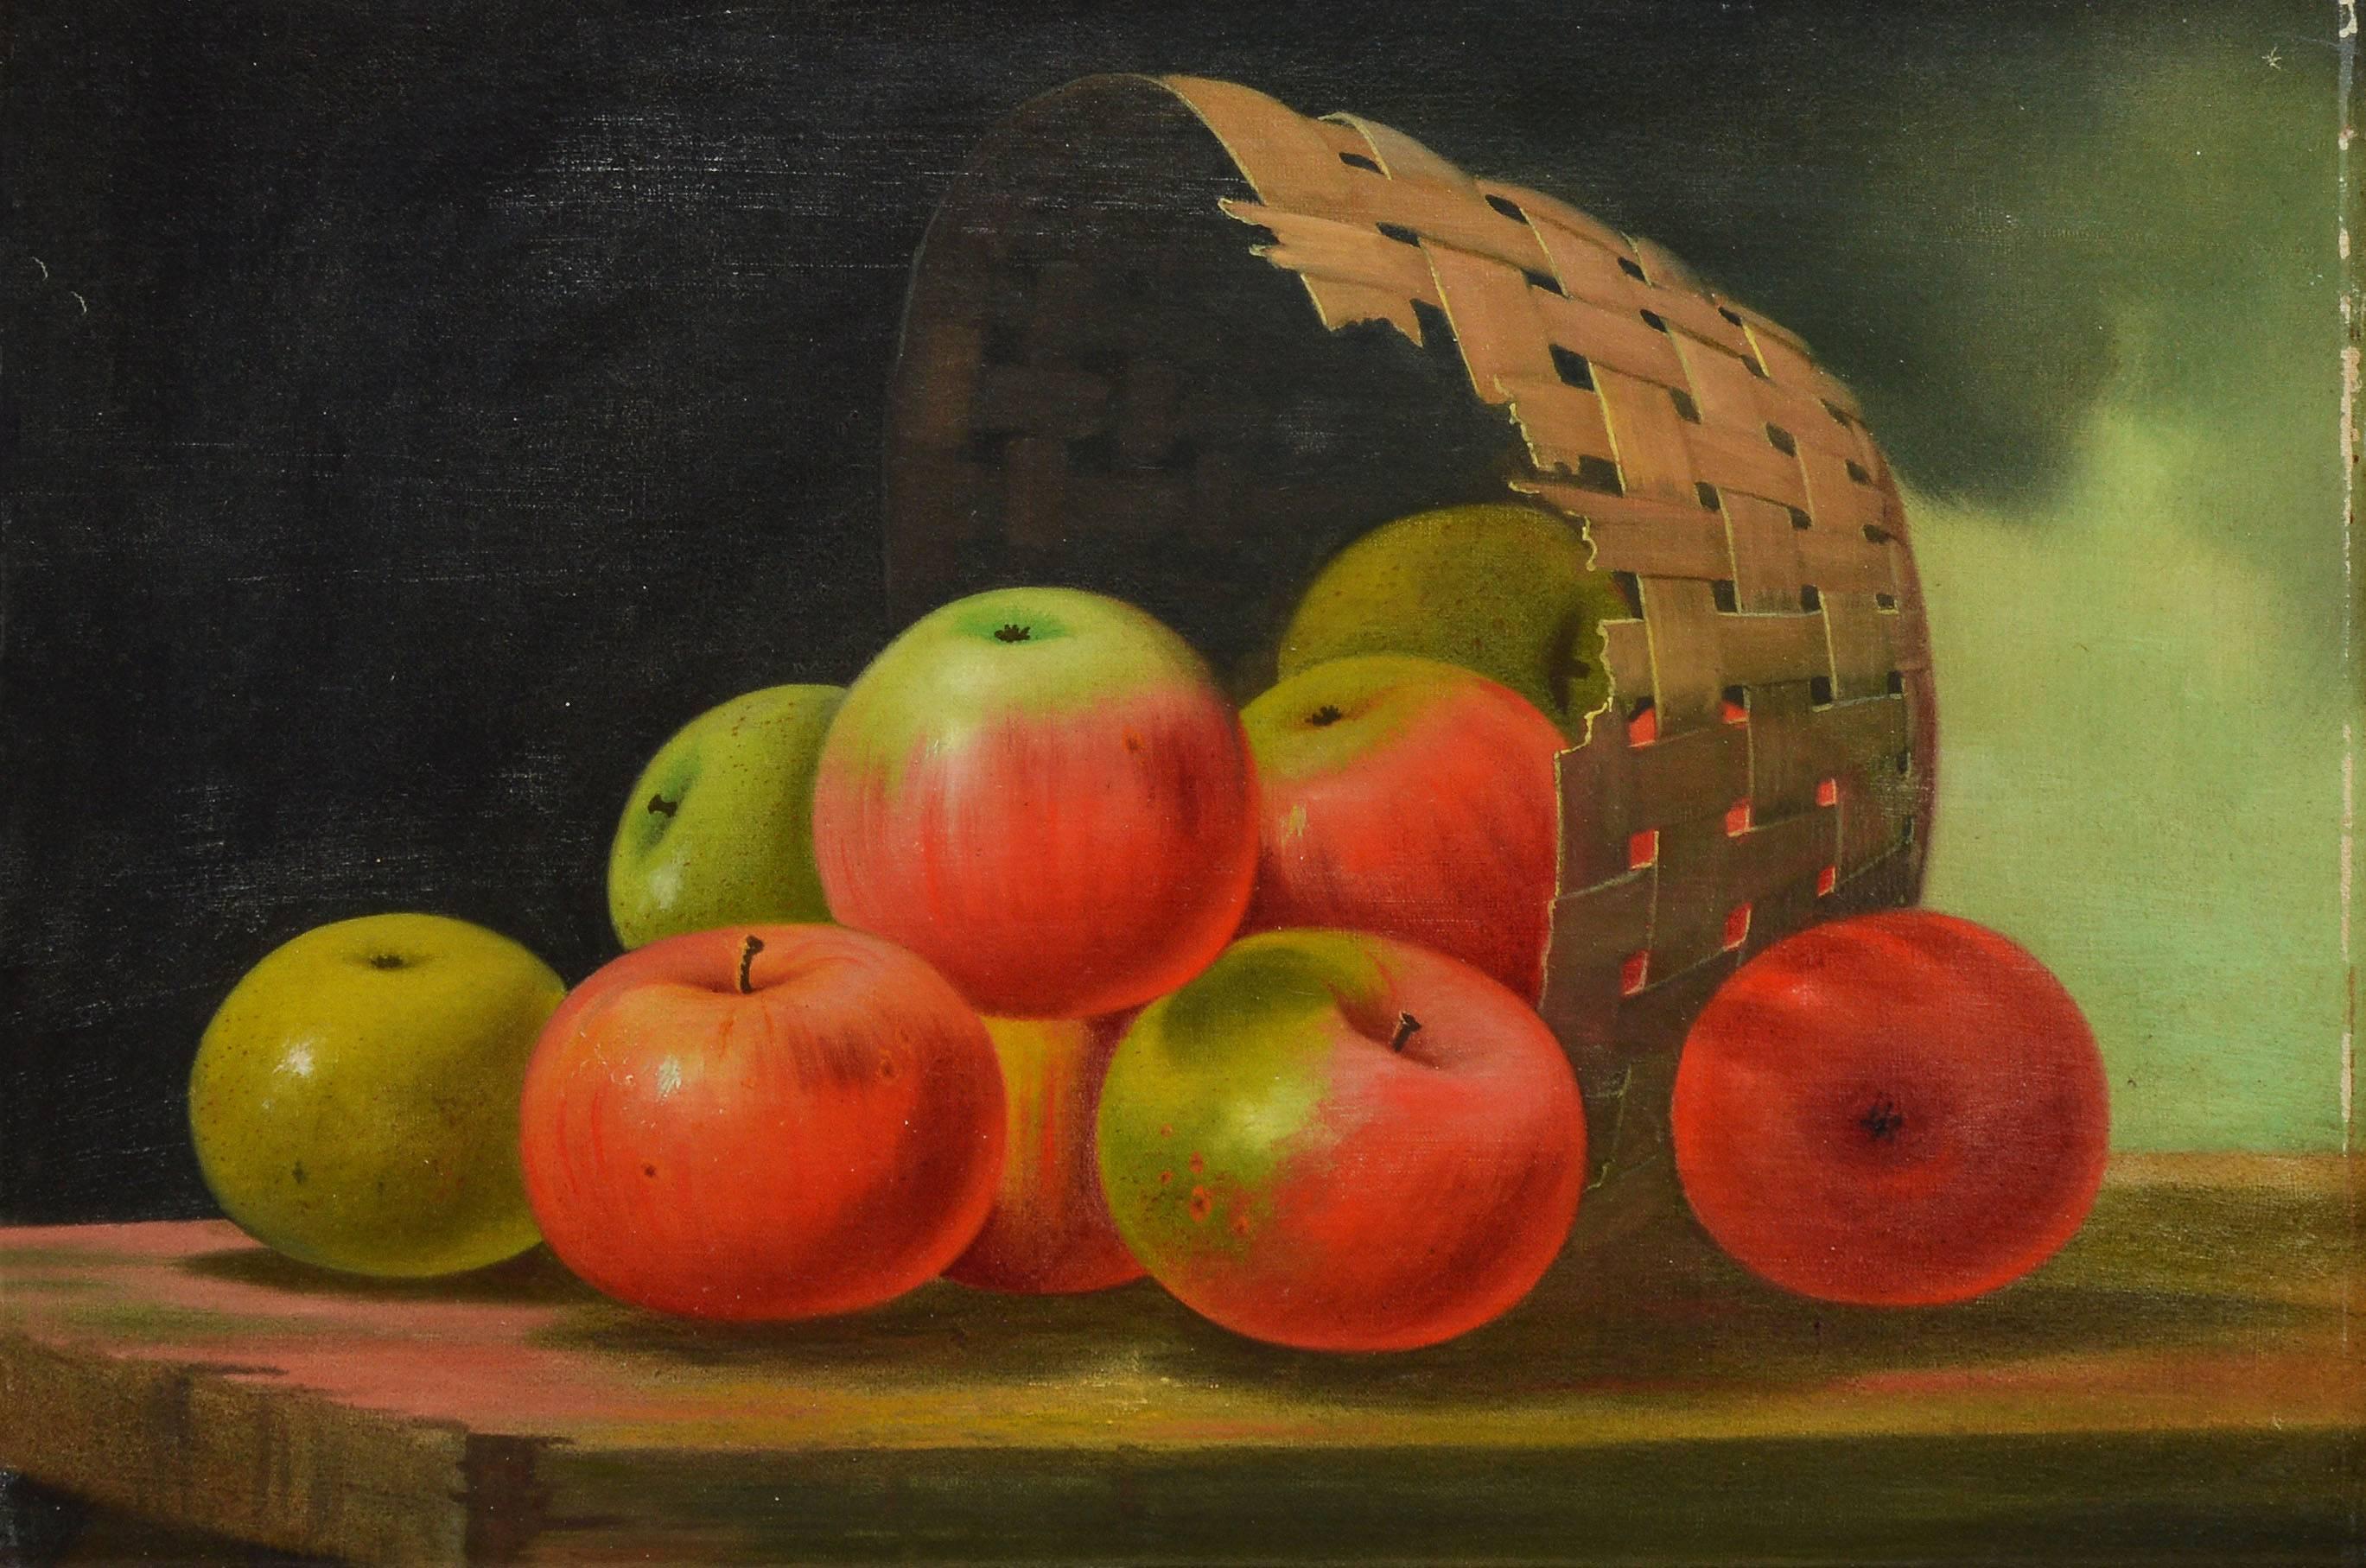 Antique American School Apple Still Life - Realist Painting by Unknown